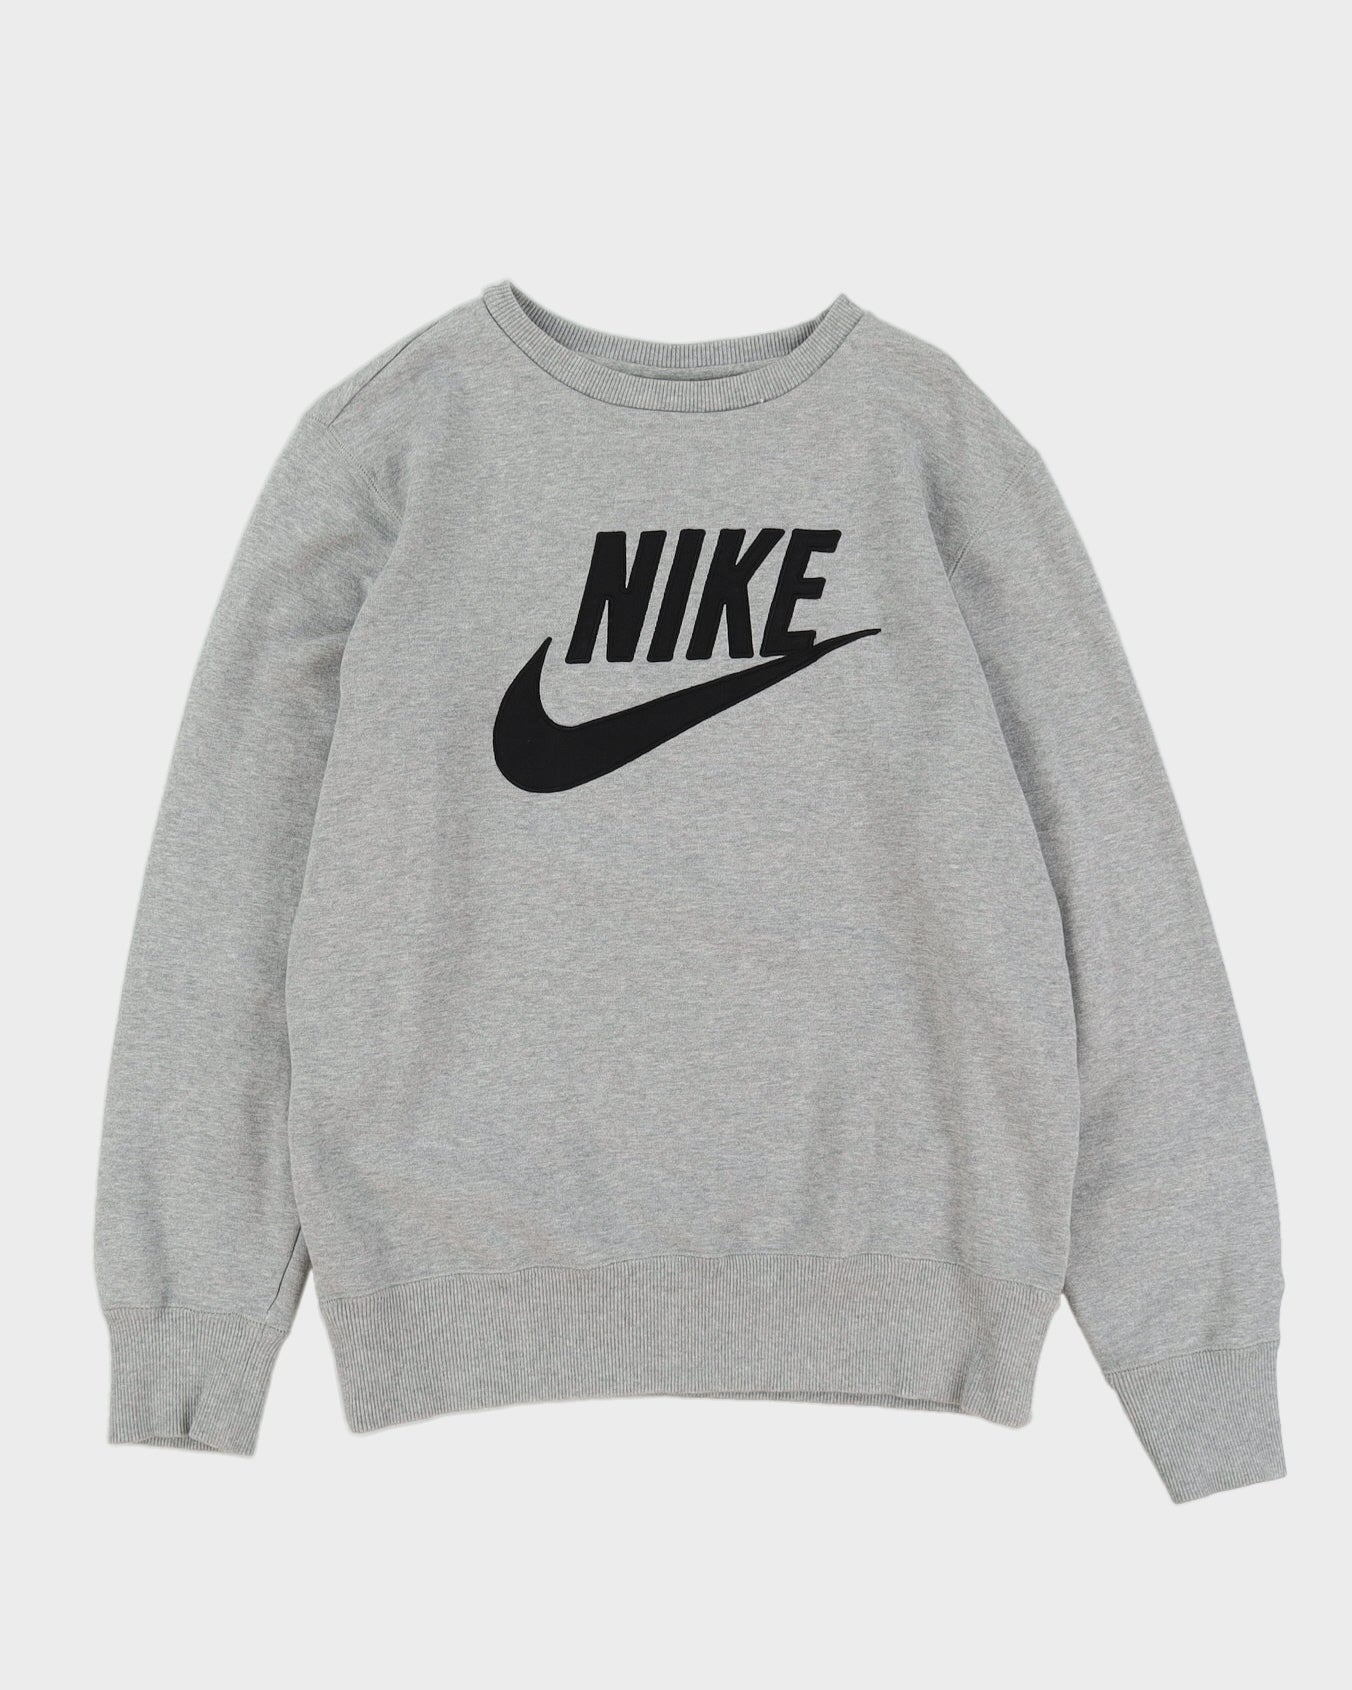 00s Nike Grey Sweatshirt With Embroidered Logo - L